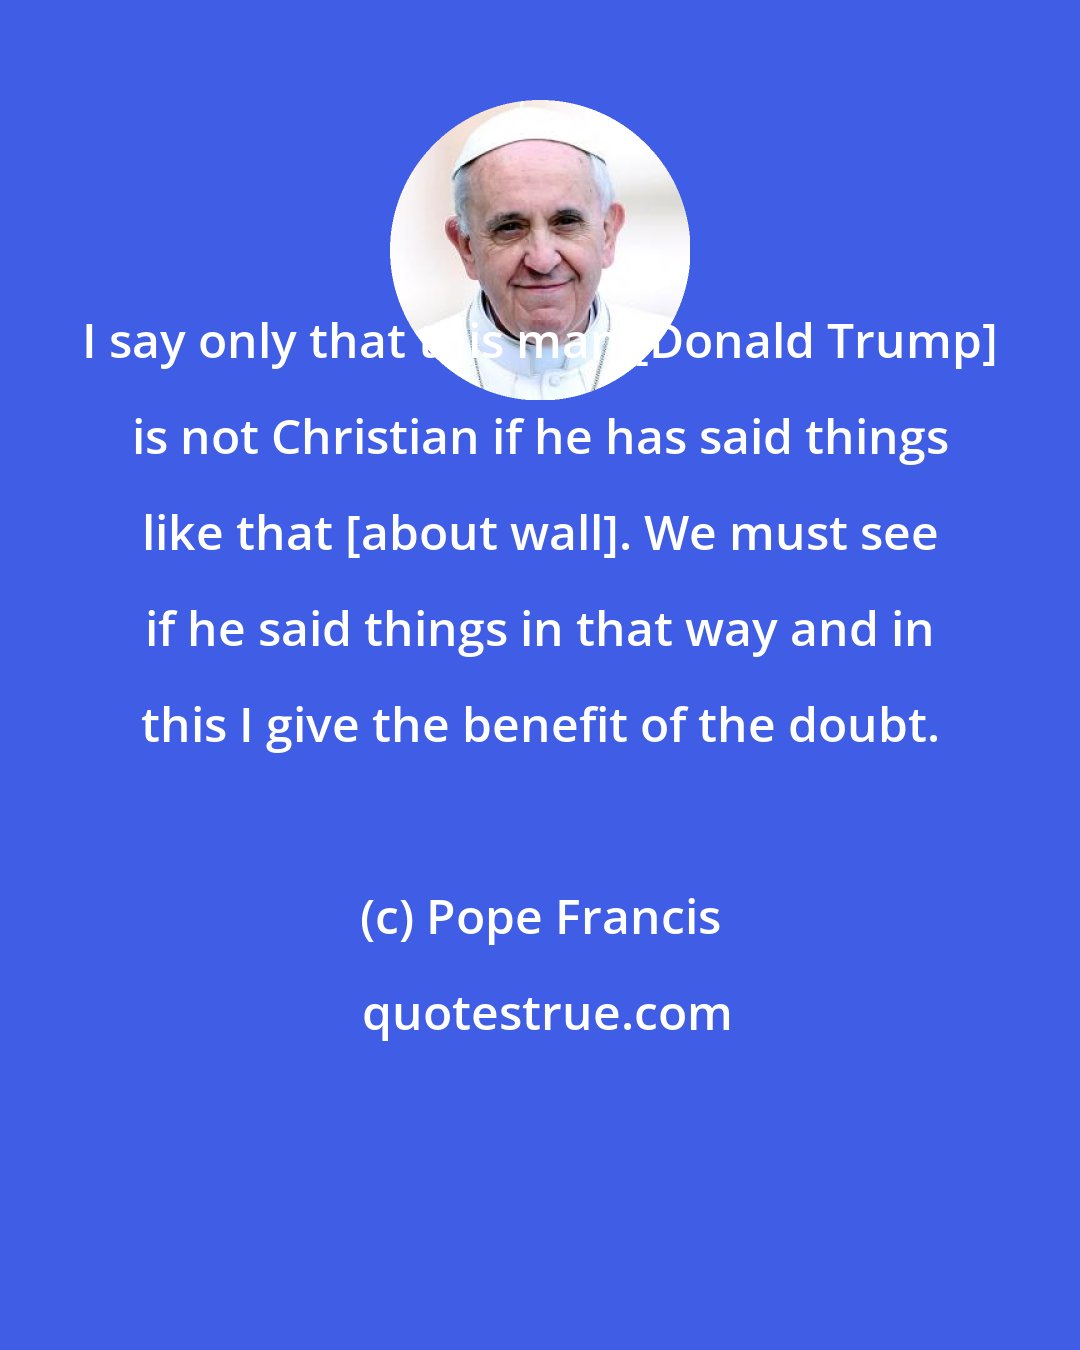 Pope Francis: I say only that this man [Donald Trump] is not Christian if he has said things like that [about wall]. We must see if he said things in that way and in this I give the benefit of the doubt.